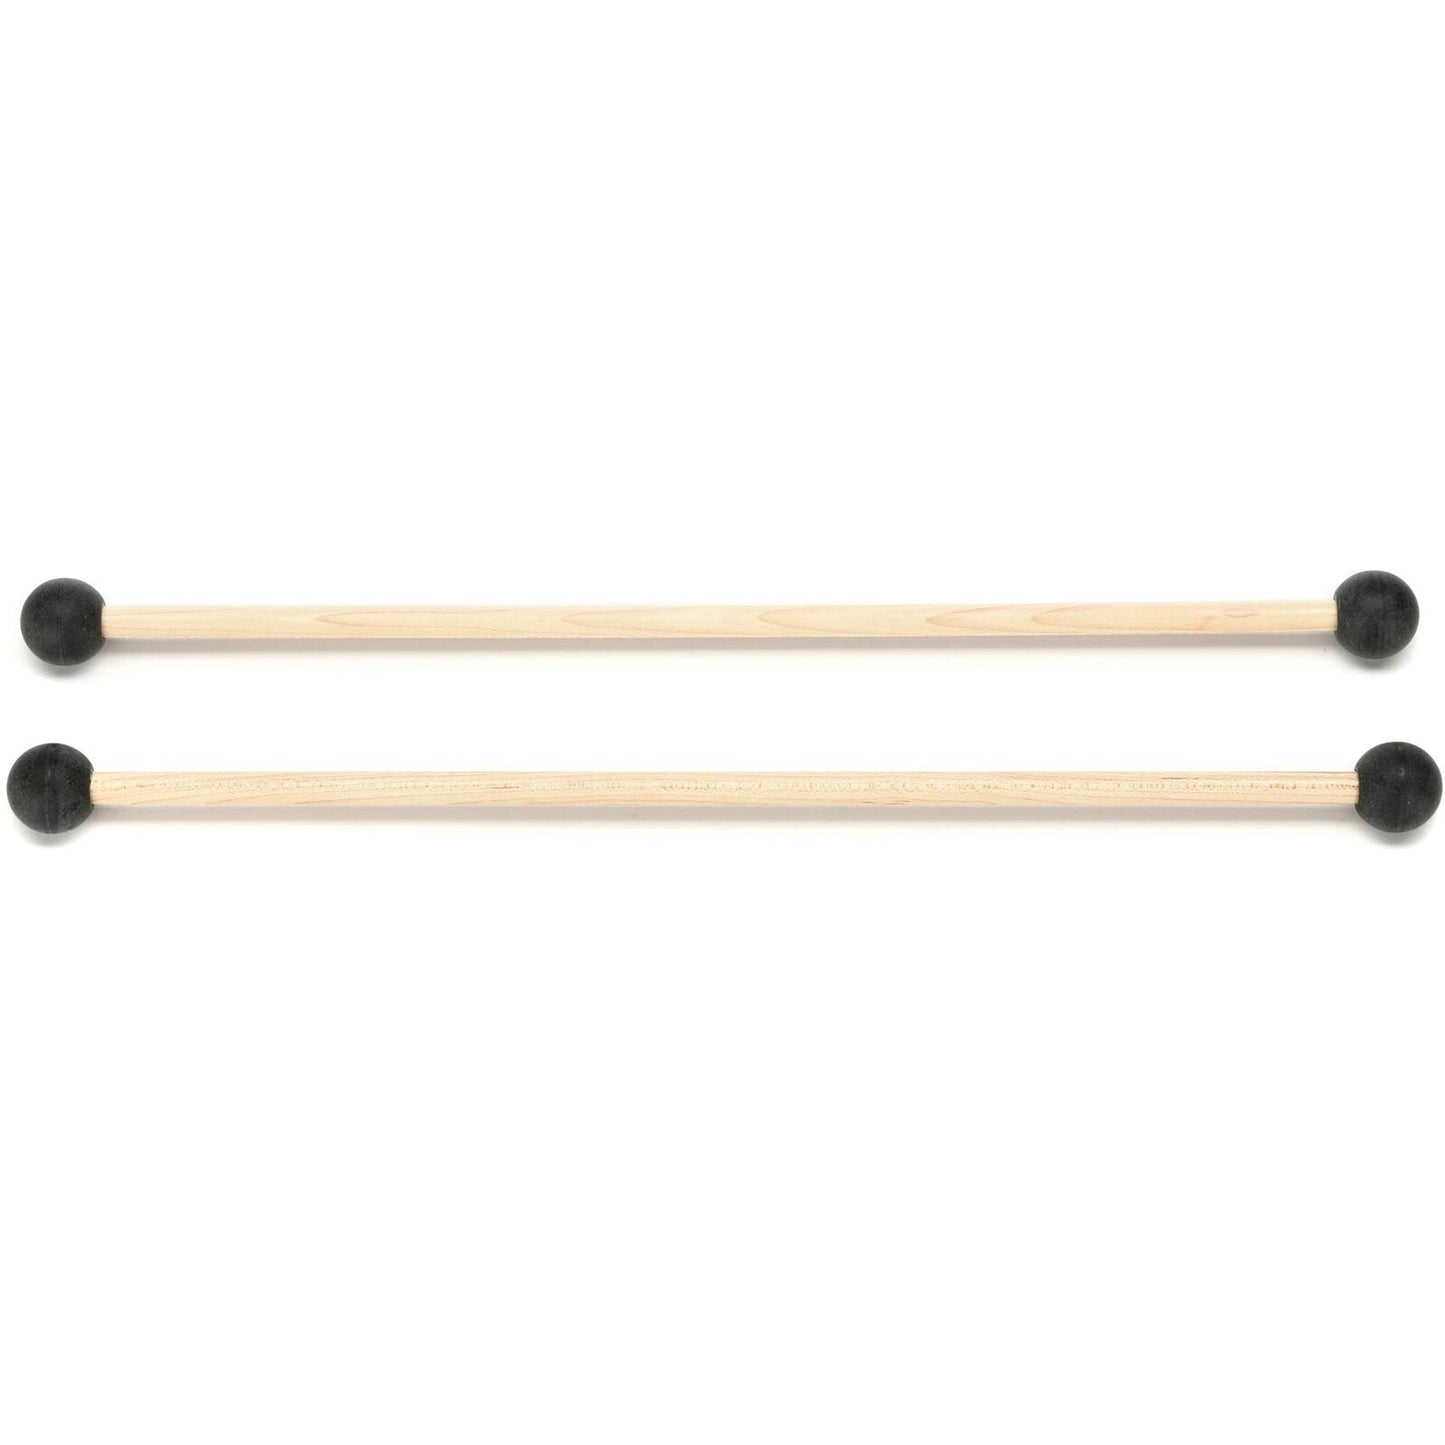 Yamaha Dual Head Student Mallets for Percussion SPM35-Andy's Music